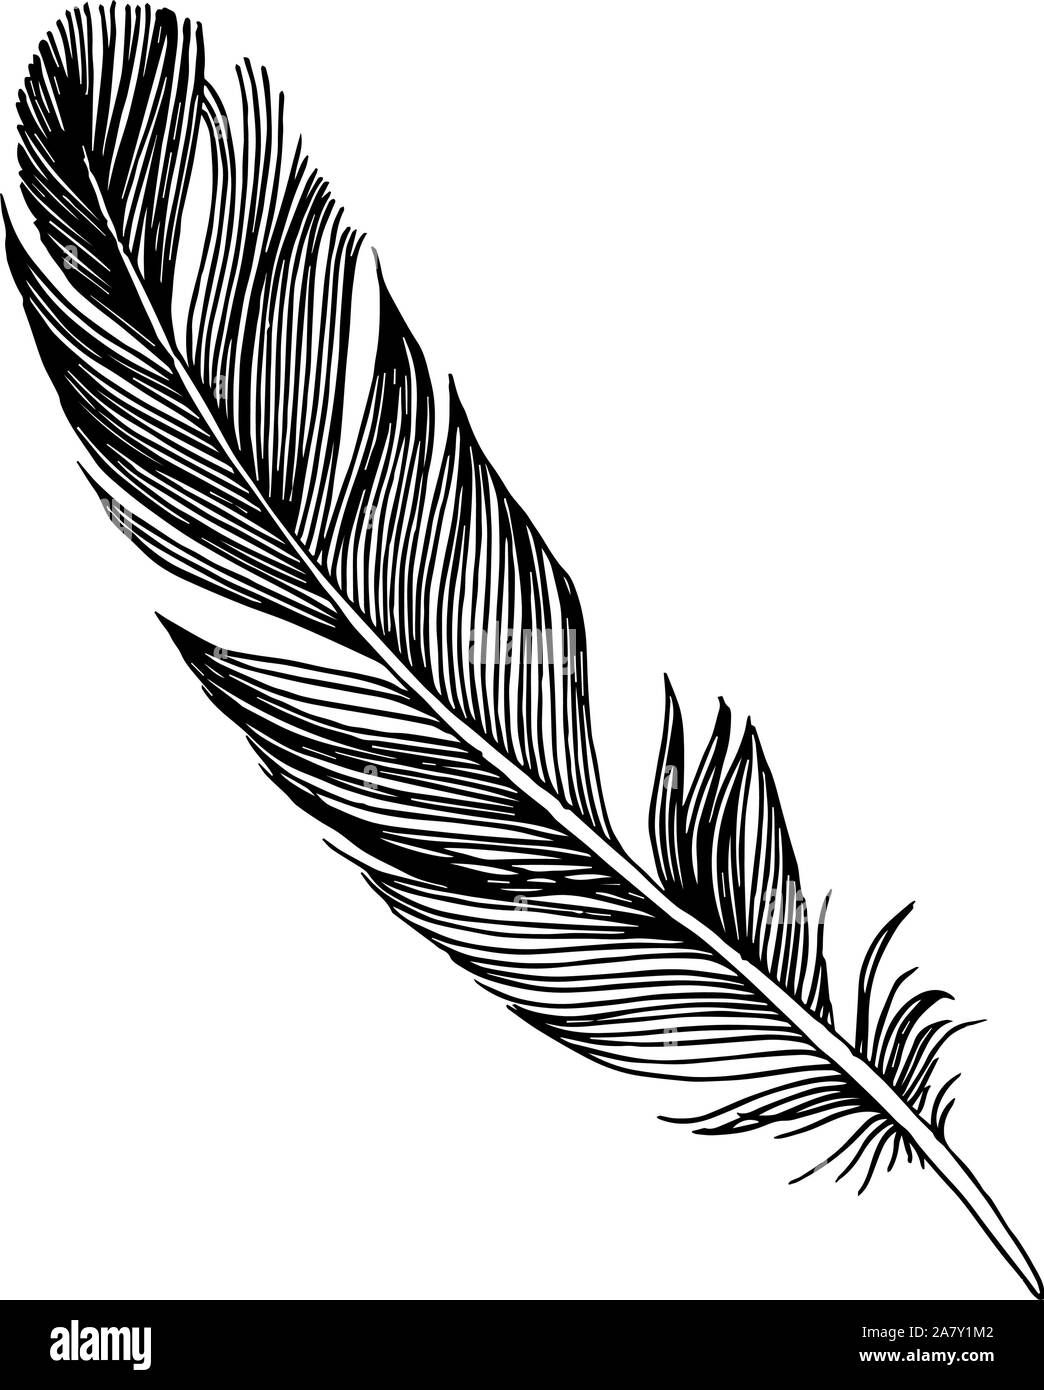 Vector bird feather from wing isolated. Black and white engraved ink ...